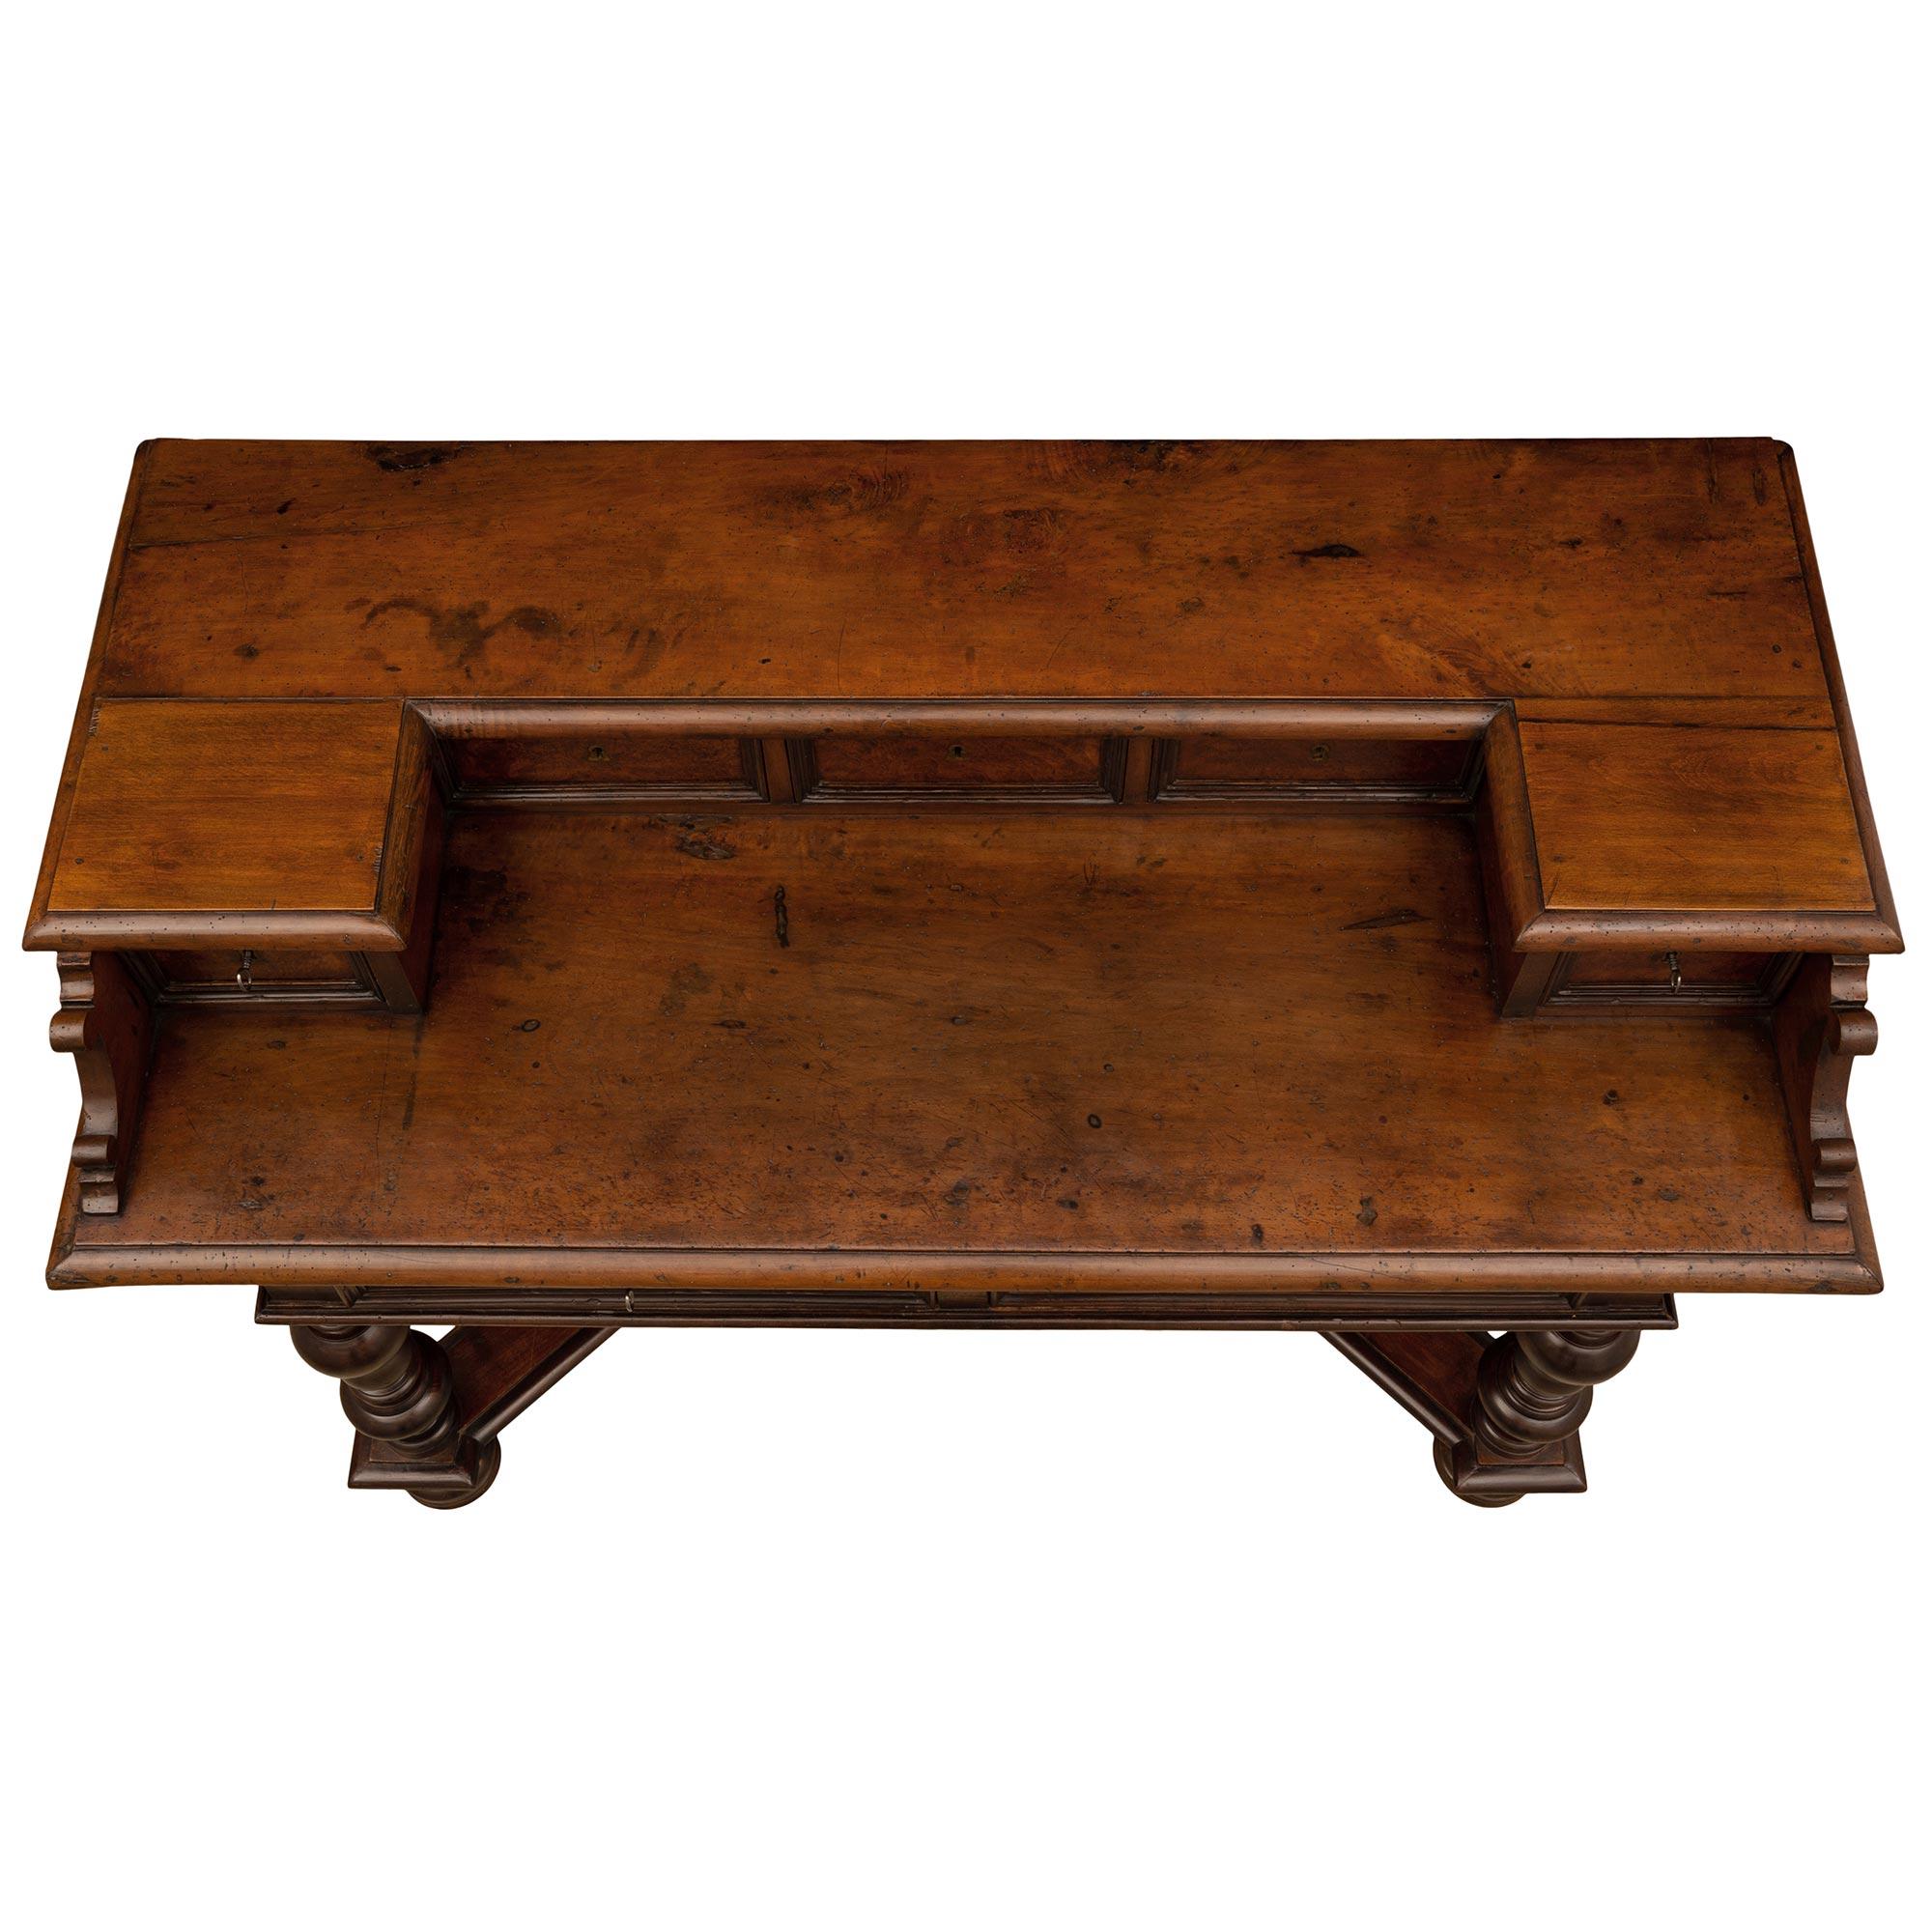 A most handsome Italian 18th-century walnut, burl walnut, and iron desk. The desk is raised by fine bun-shaped feet below impressive turned baluster-shaped legs each connected by an 'X' stretcher with a mottled border. The straight apron displays